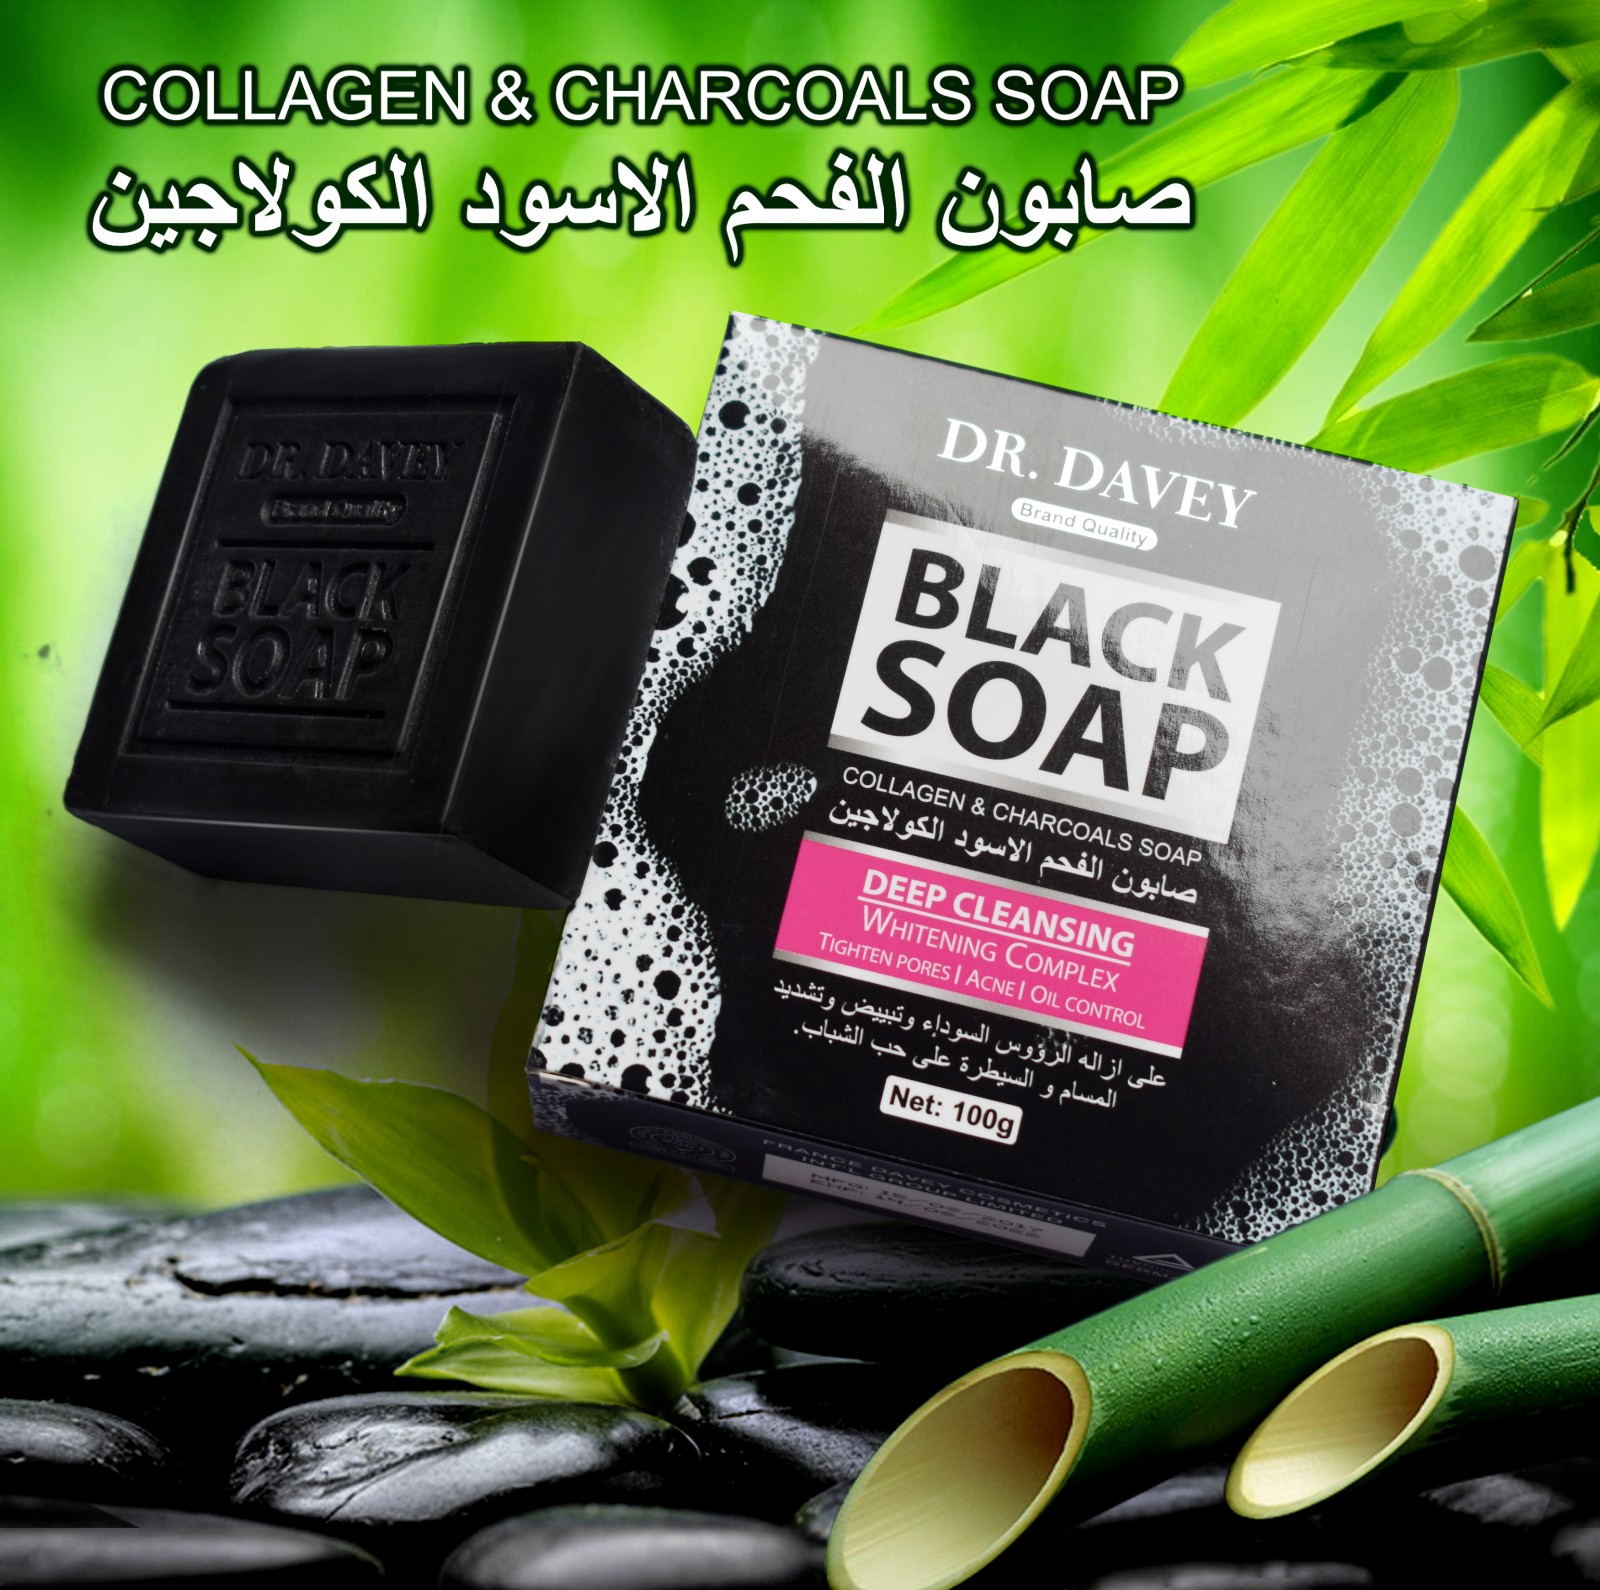 DR.DAVEY black charcoal soap cleaning whitening soap